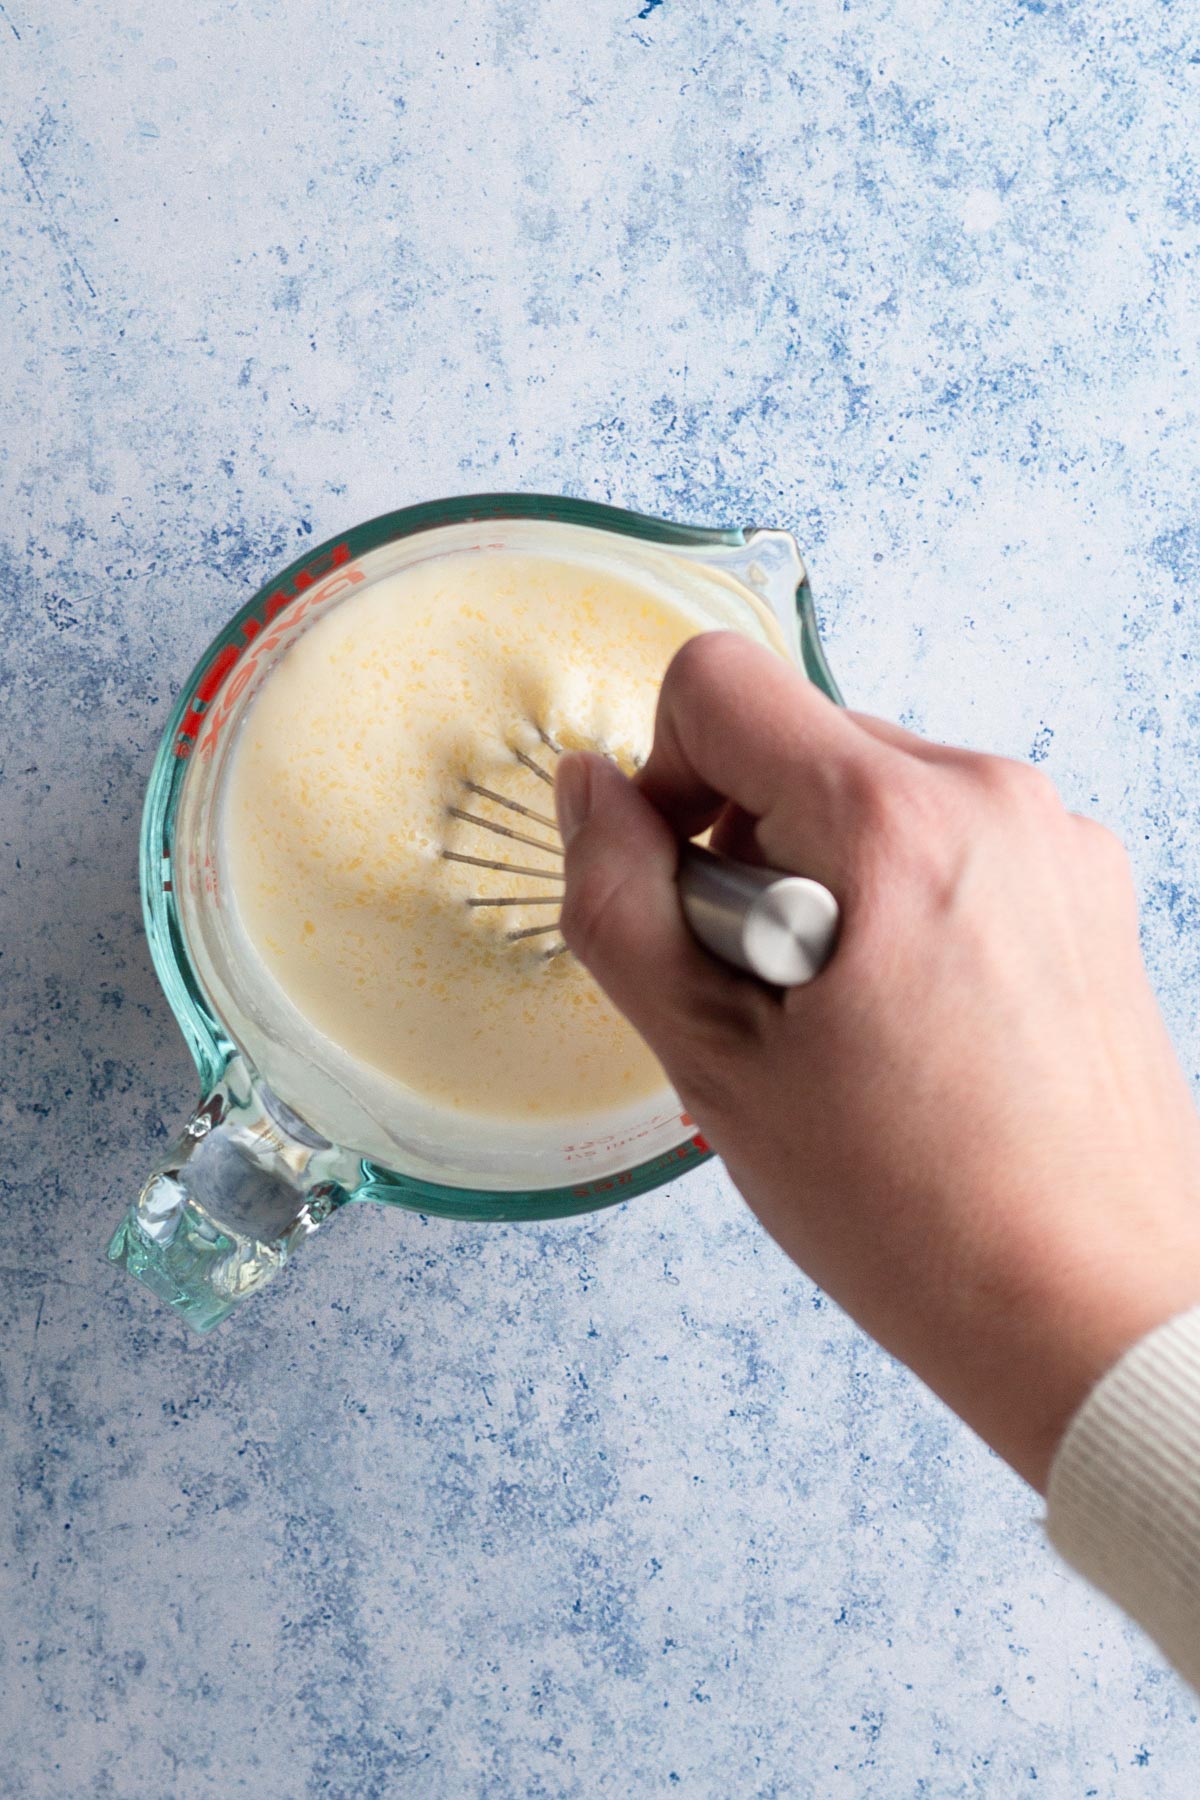 Hand whisking wet ingredients together in a glass measuring cup.